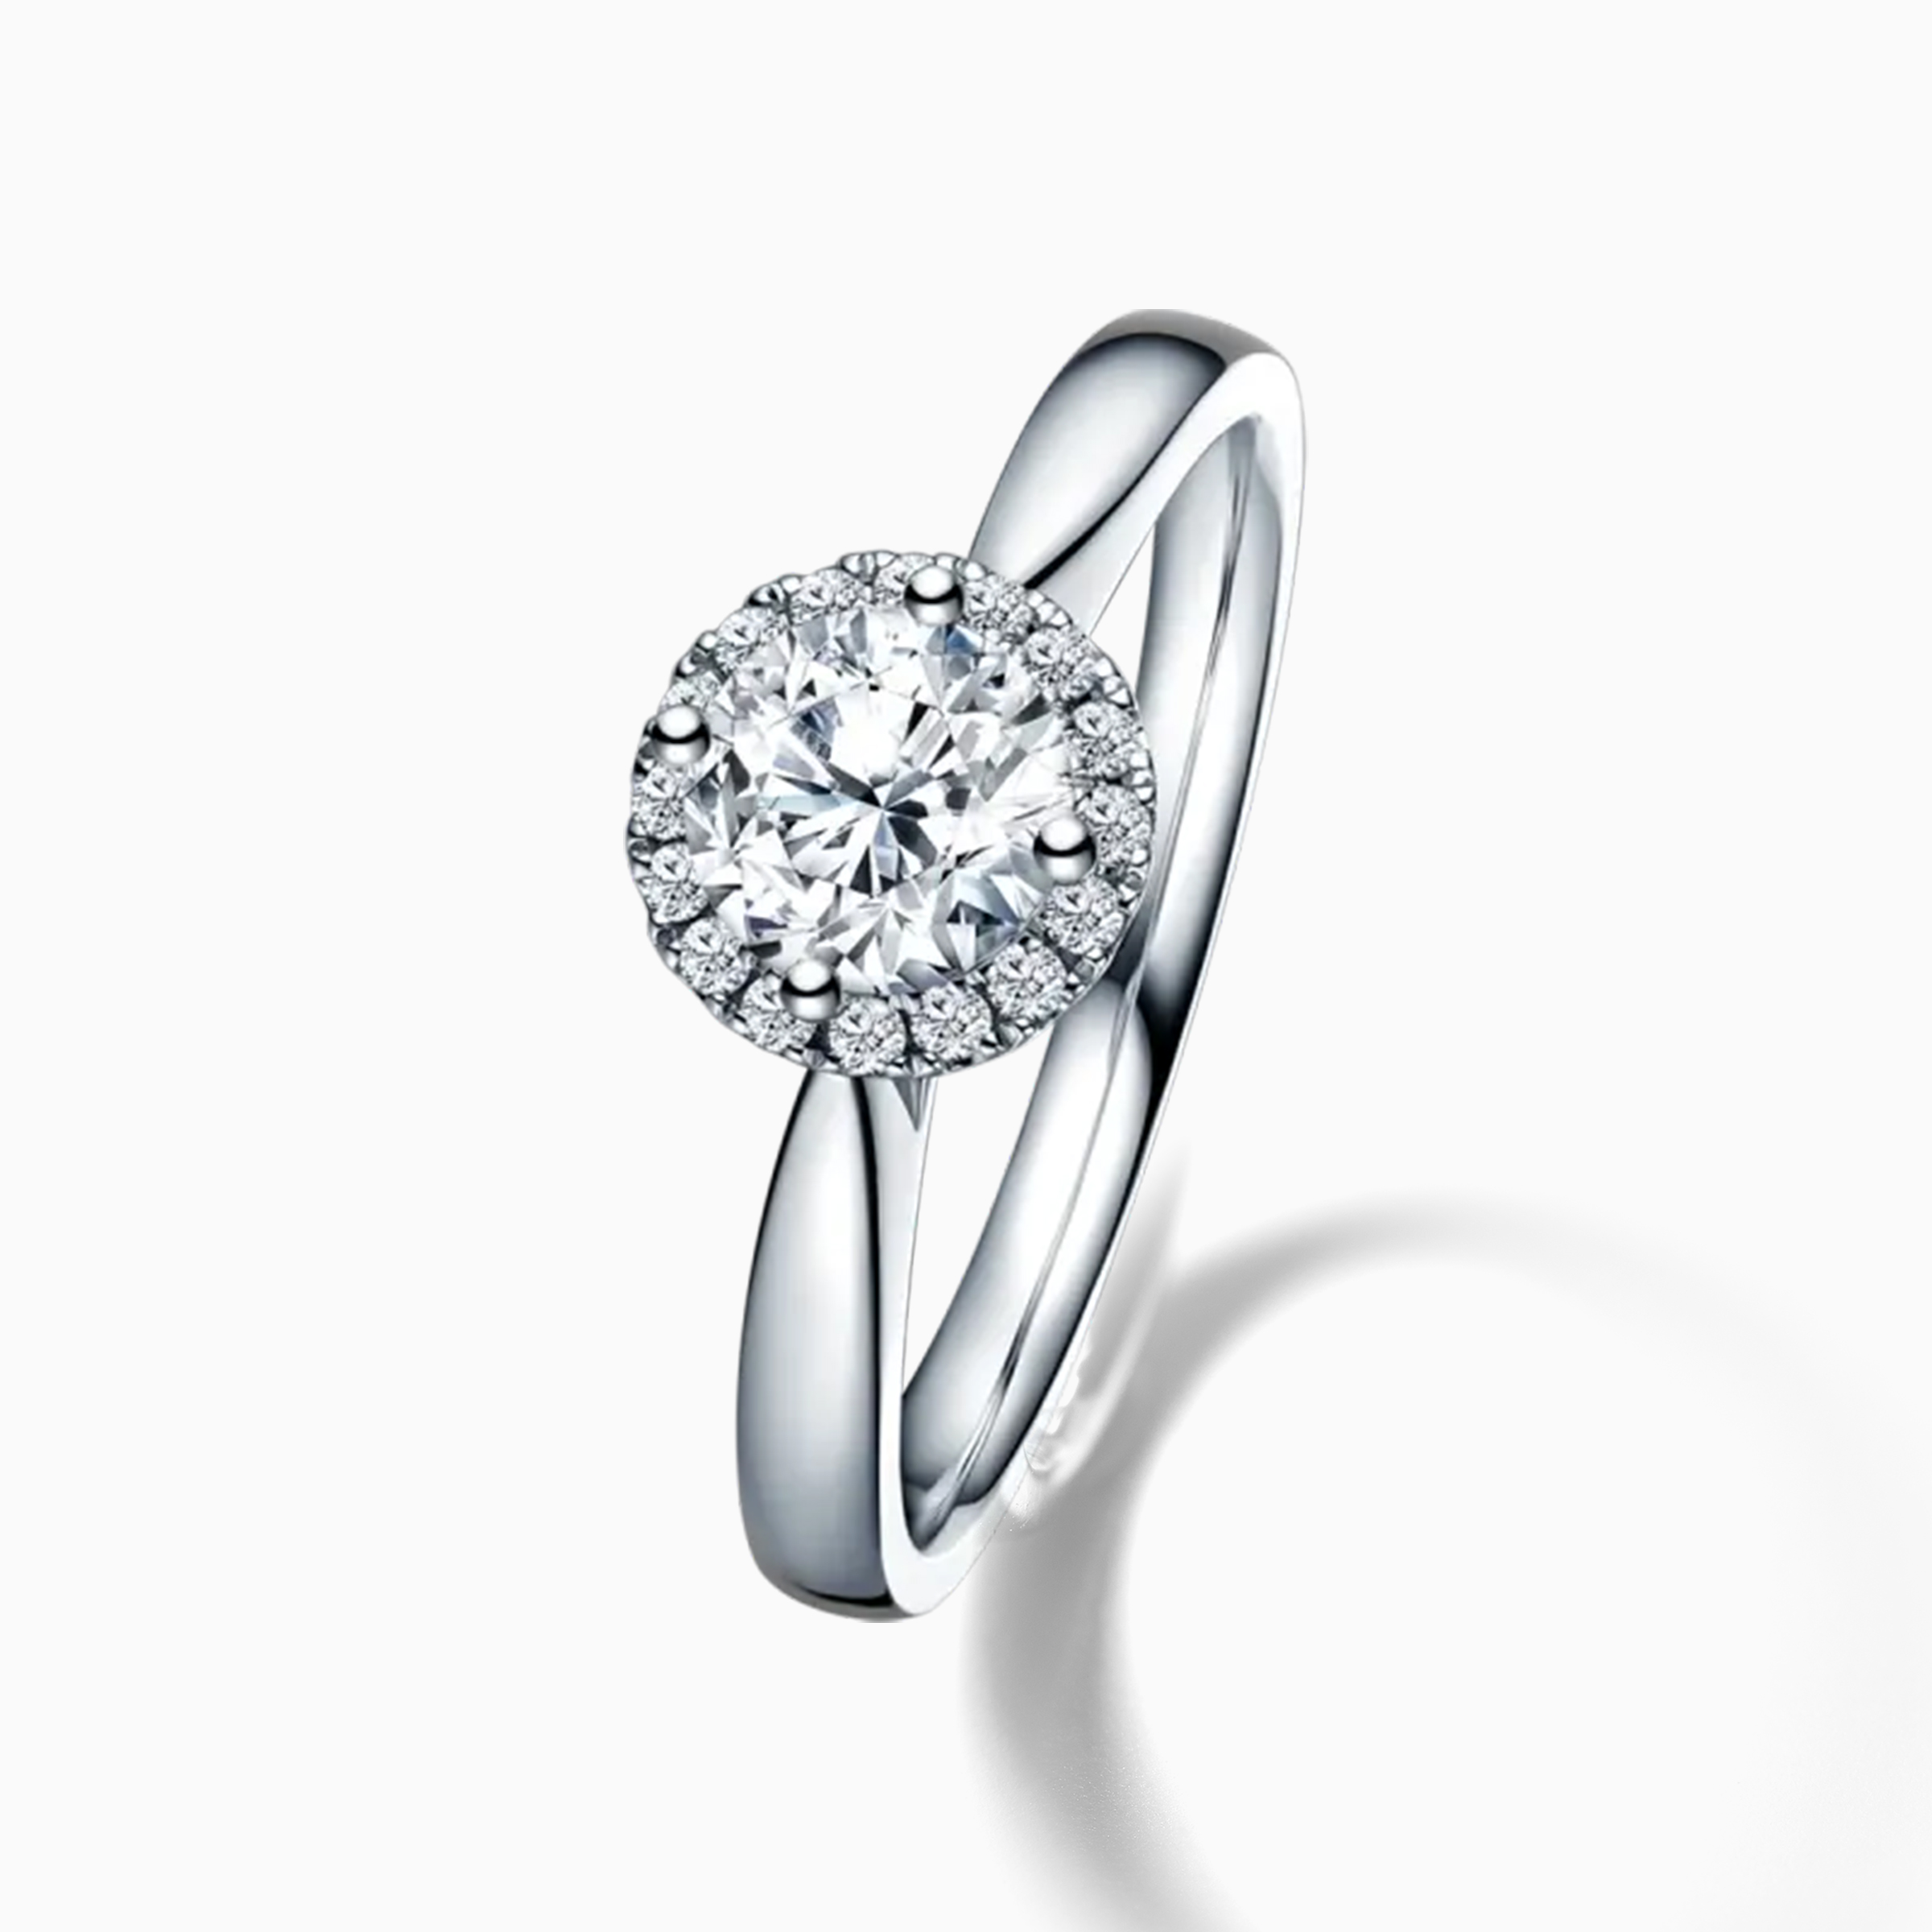 Darry Ring round diamond engagement ring top view